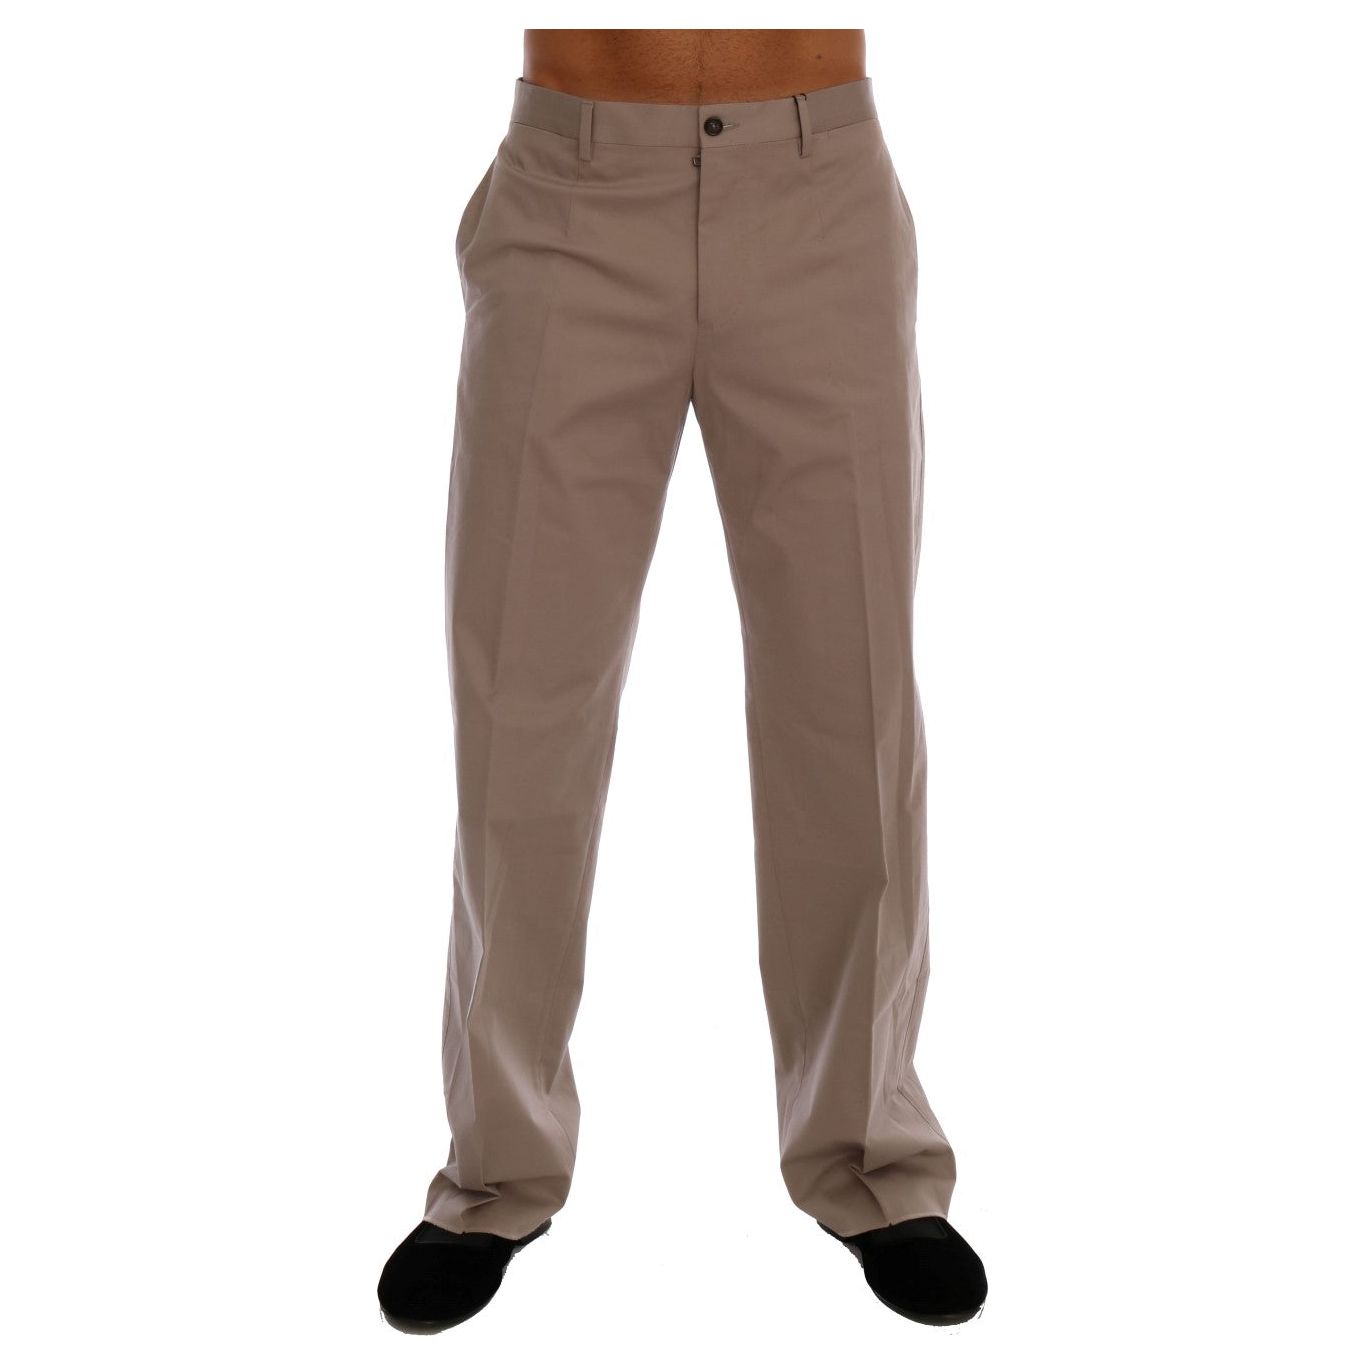 Dolce & Gabbana Chic Beige Chinos Casual Pants beige-cotton-stretch-chinos-pants Jeans & Pants 447481-beige-cotton-stretch-chinos-pants-3.jpg